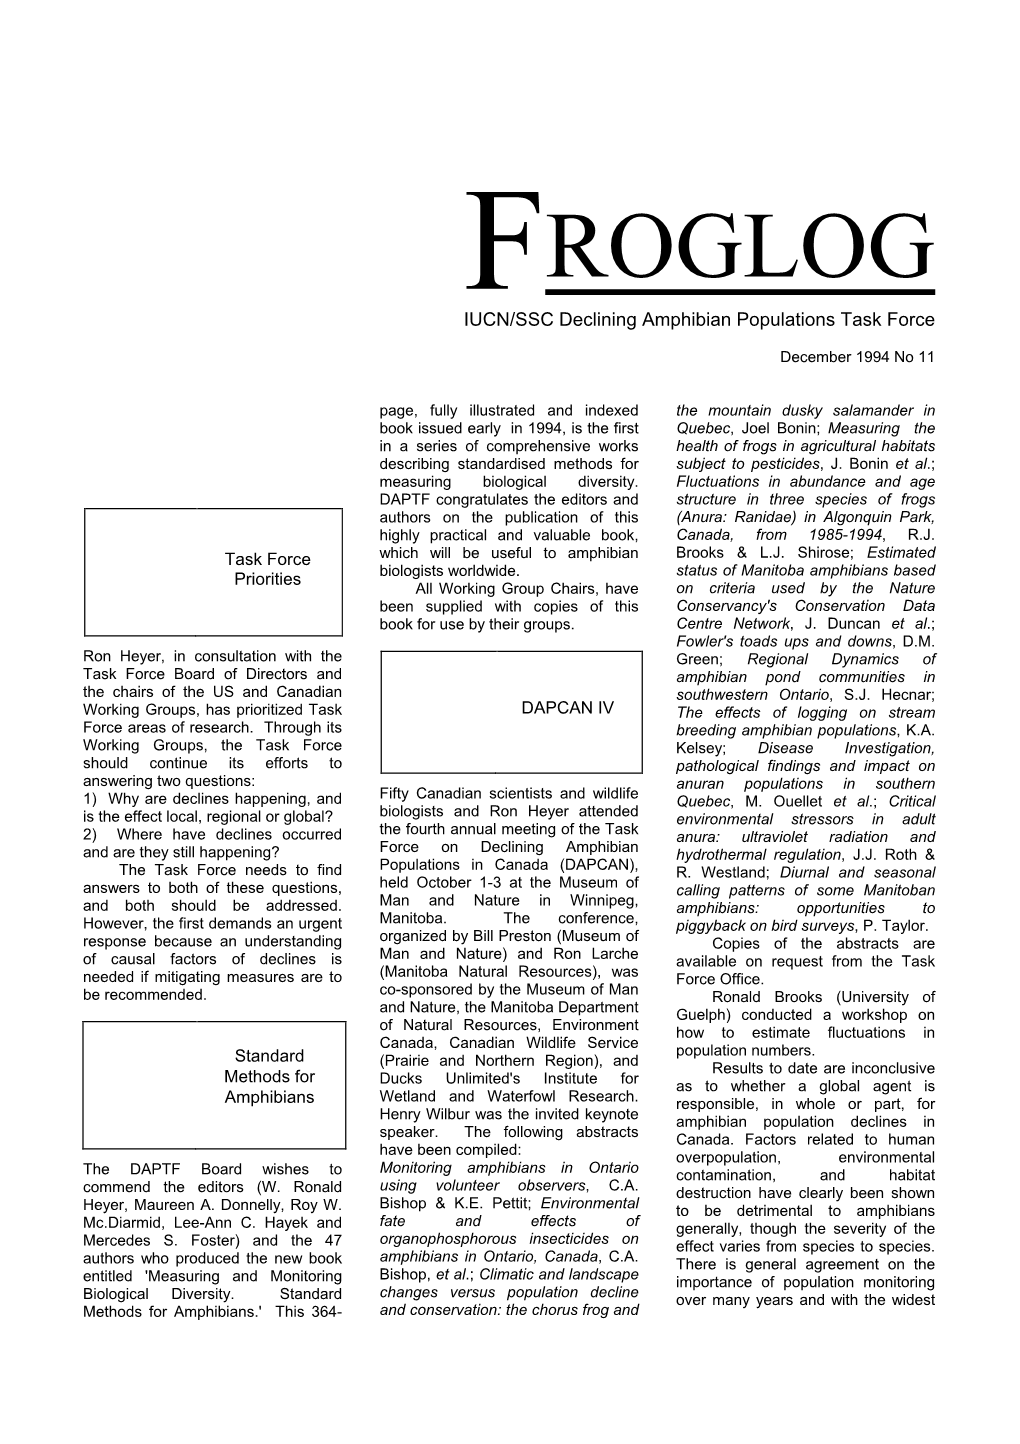 FROGLOG Newsletter of the World Conservation Union (IUCN), Species Survival Commission (SSC) Declining Amphibian Populations Task Force (DAPTF)